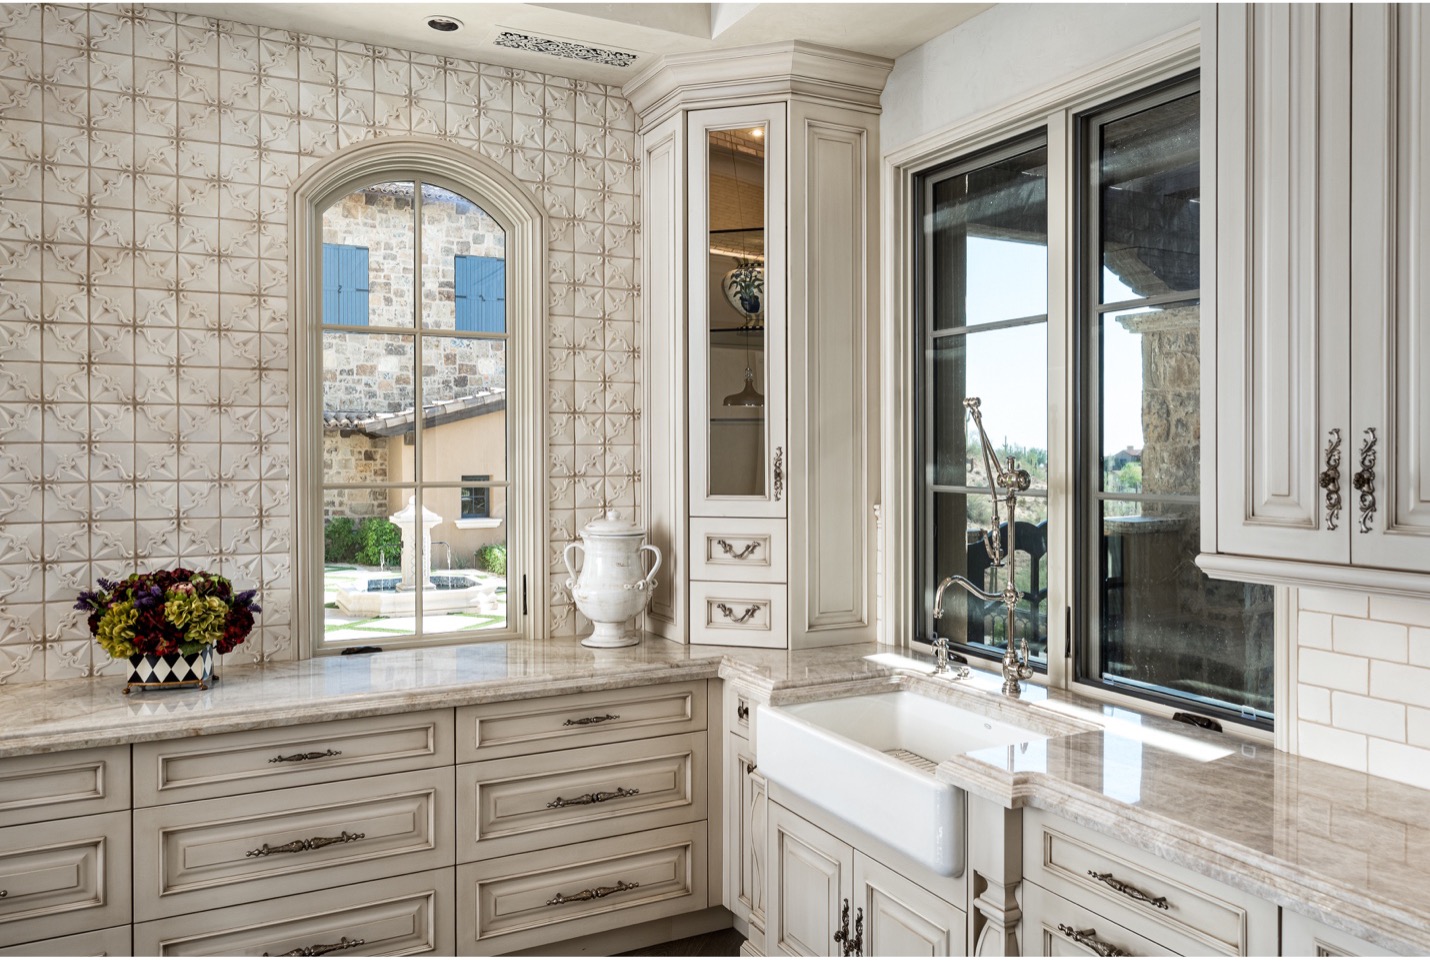 French-inspired luxury kitchen with quartzite countertops